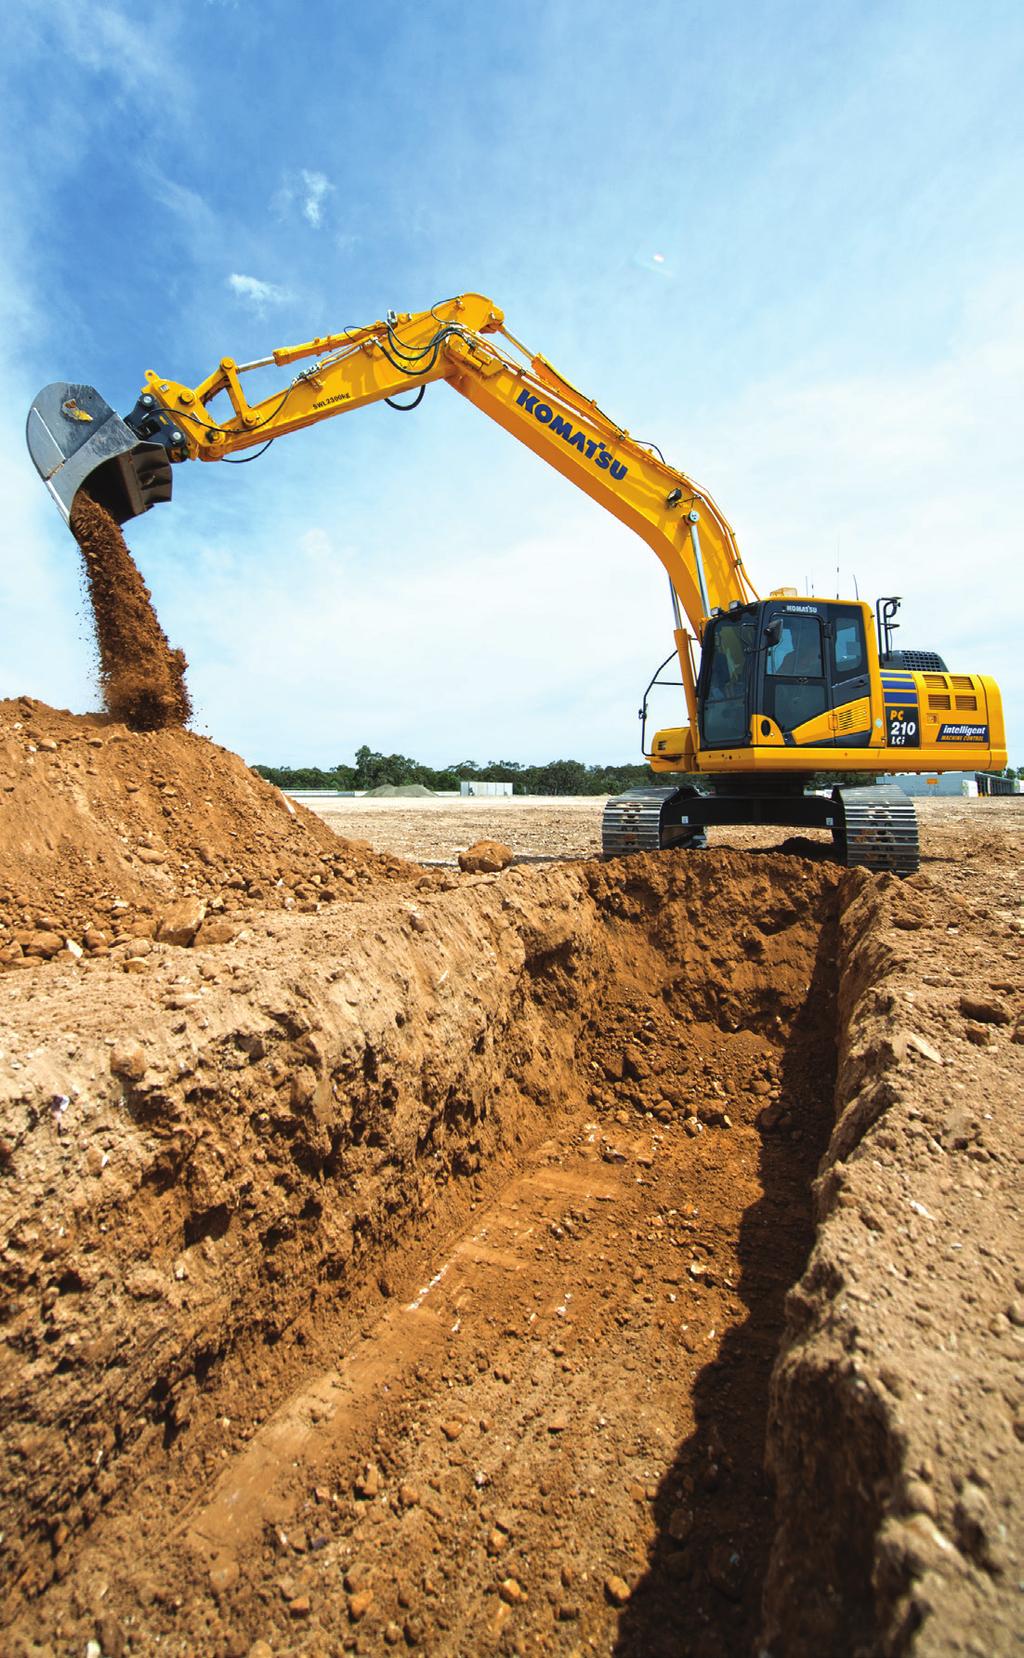 intelligent MACHINE CONTROL Introducing intelligent Machine Control Komatsu s innovative intelligent Machine Control (imc) technology solutions are making our customers more productive today and into